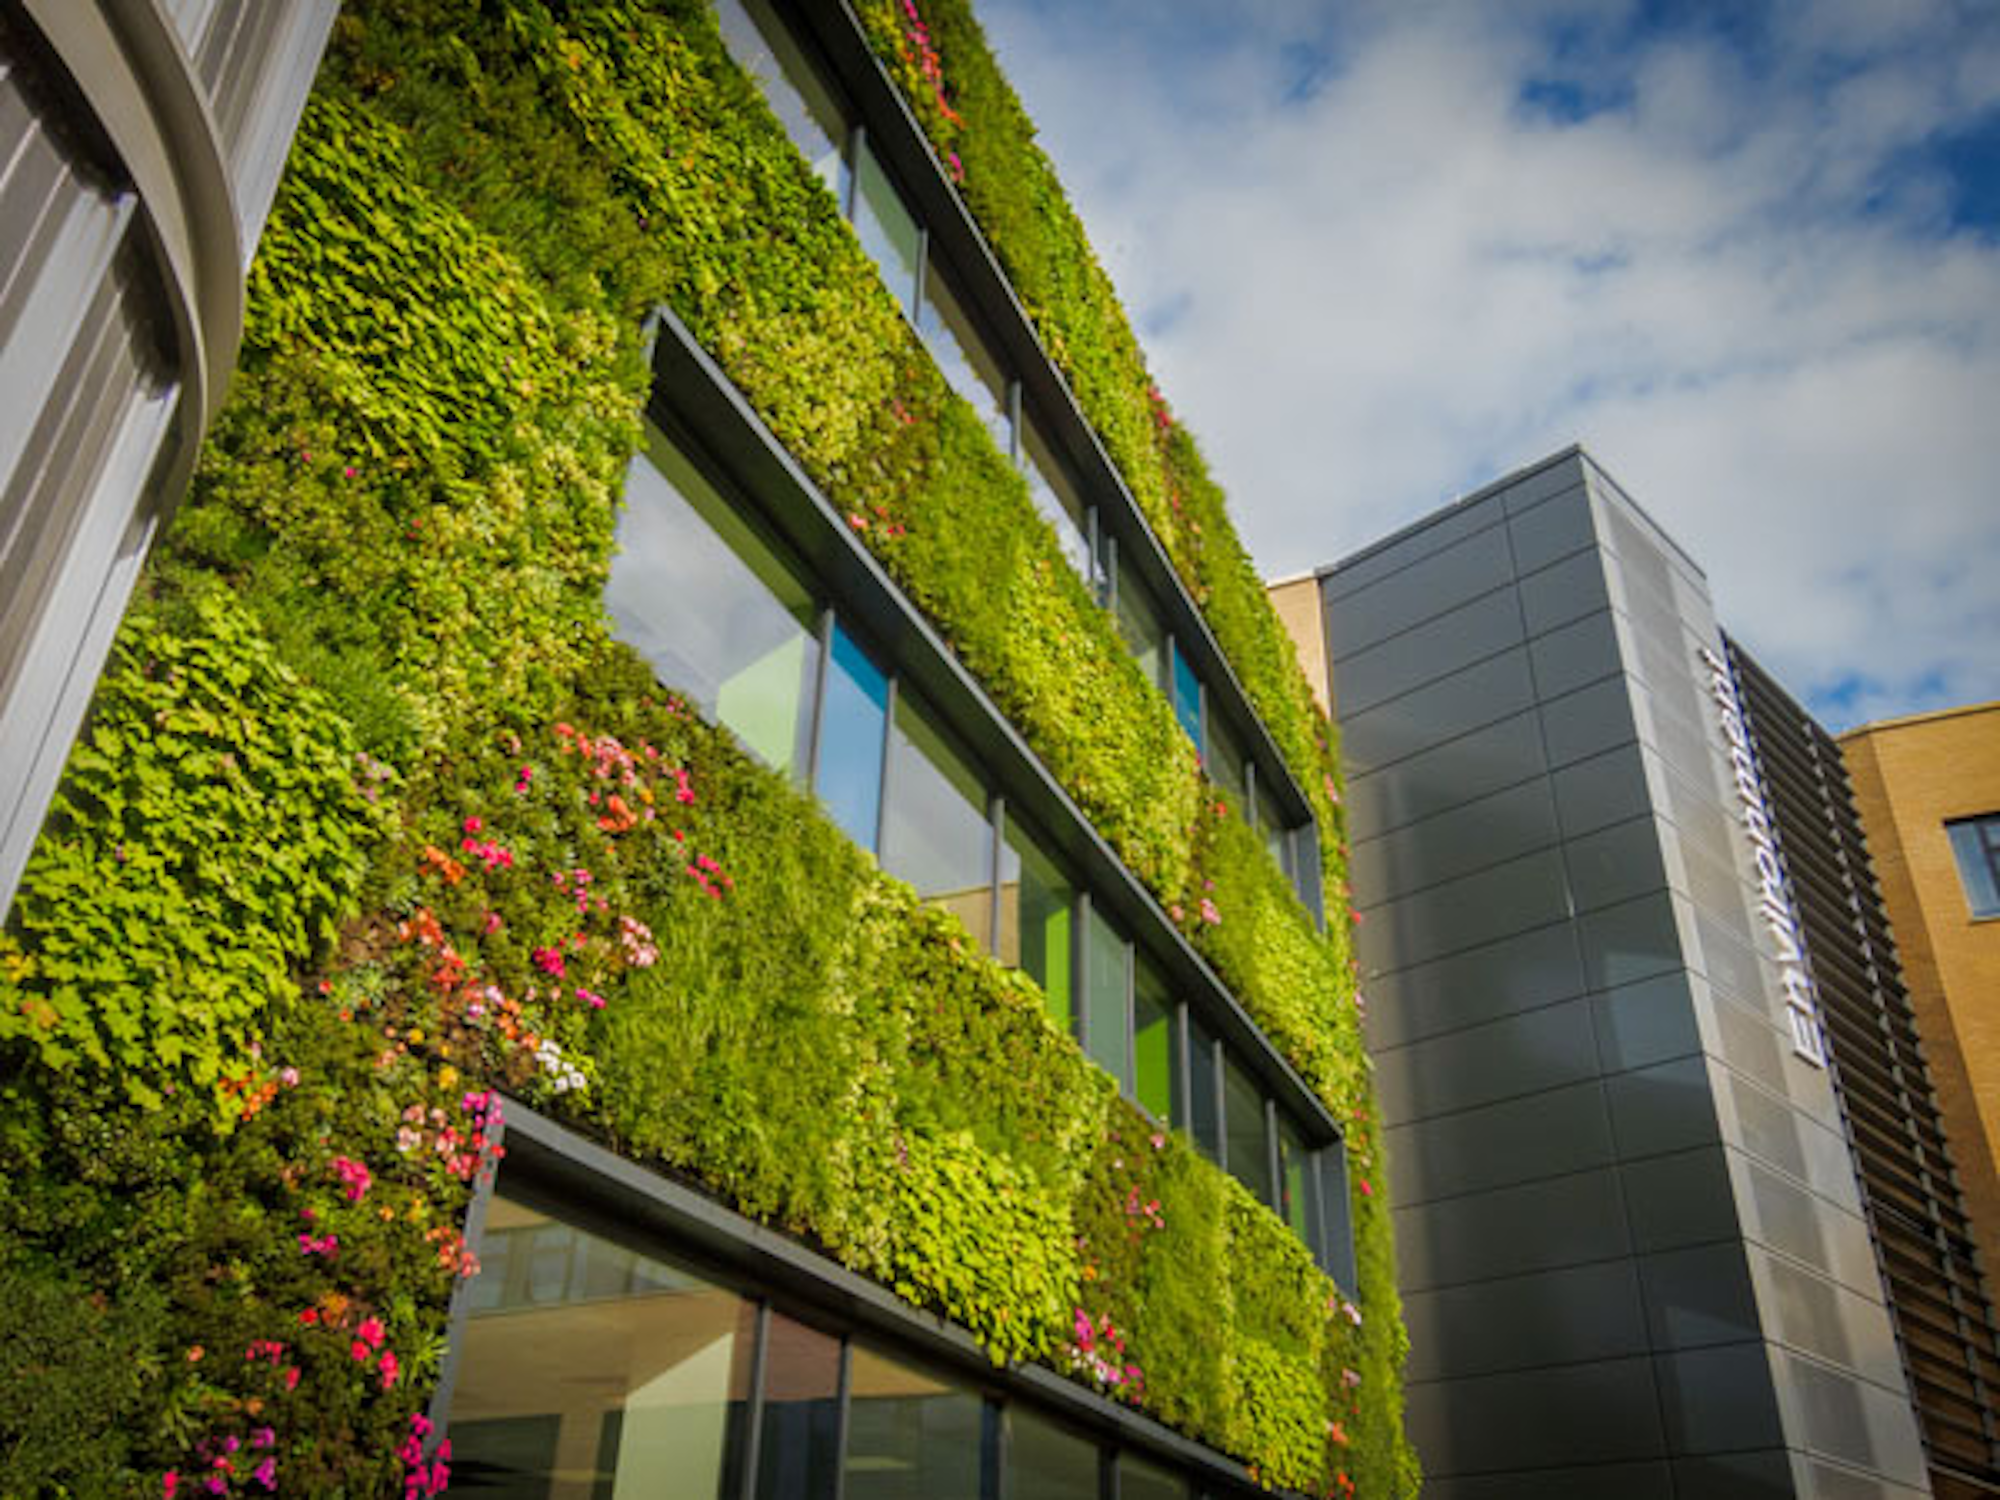 Living Wall At University Of York With Pink Flowering Plants